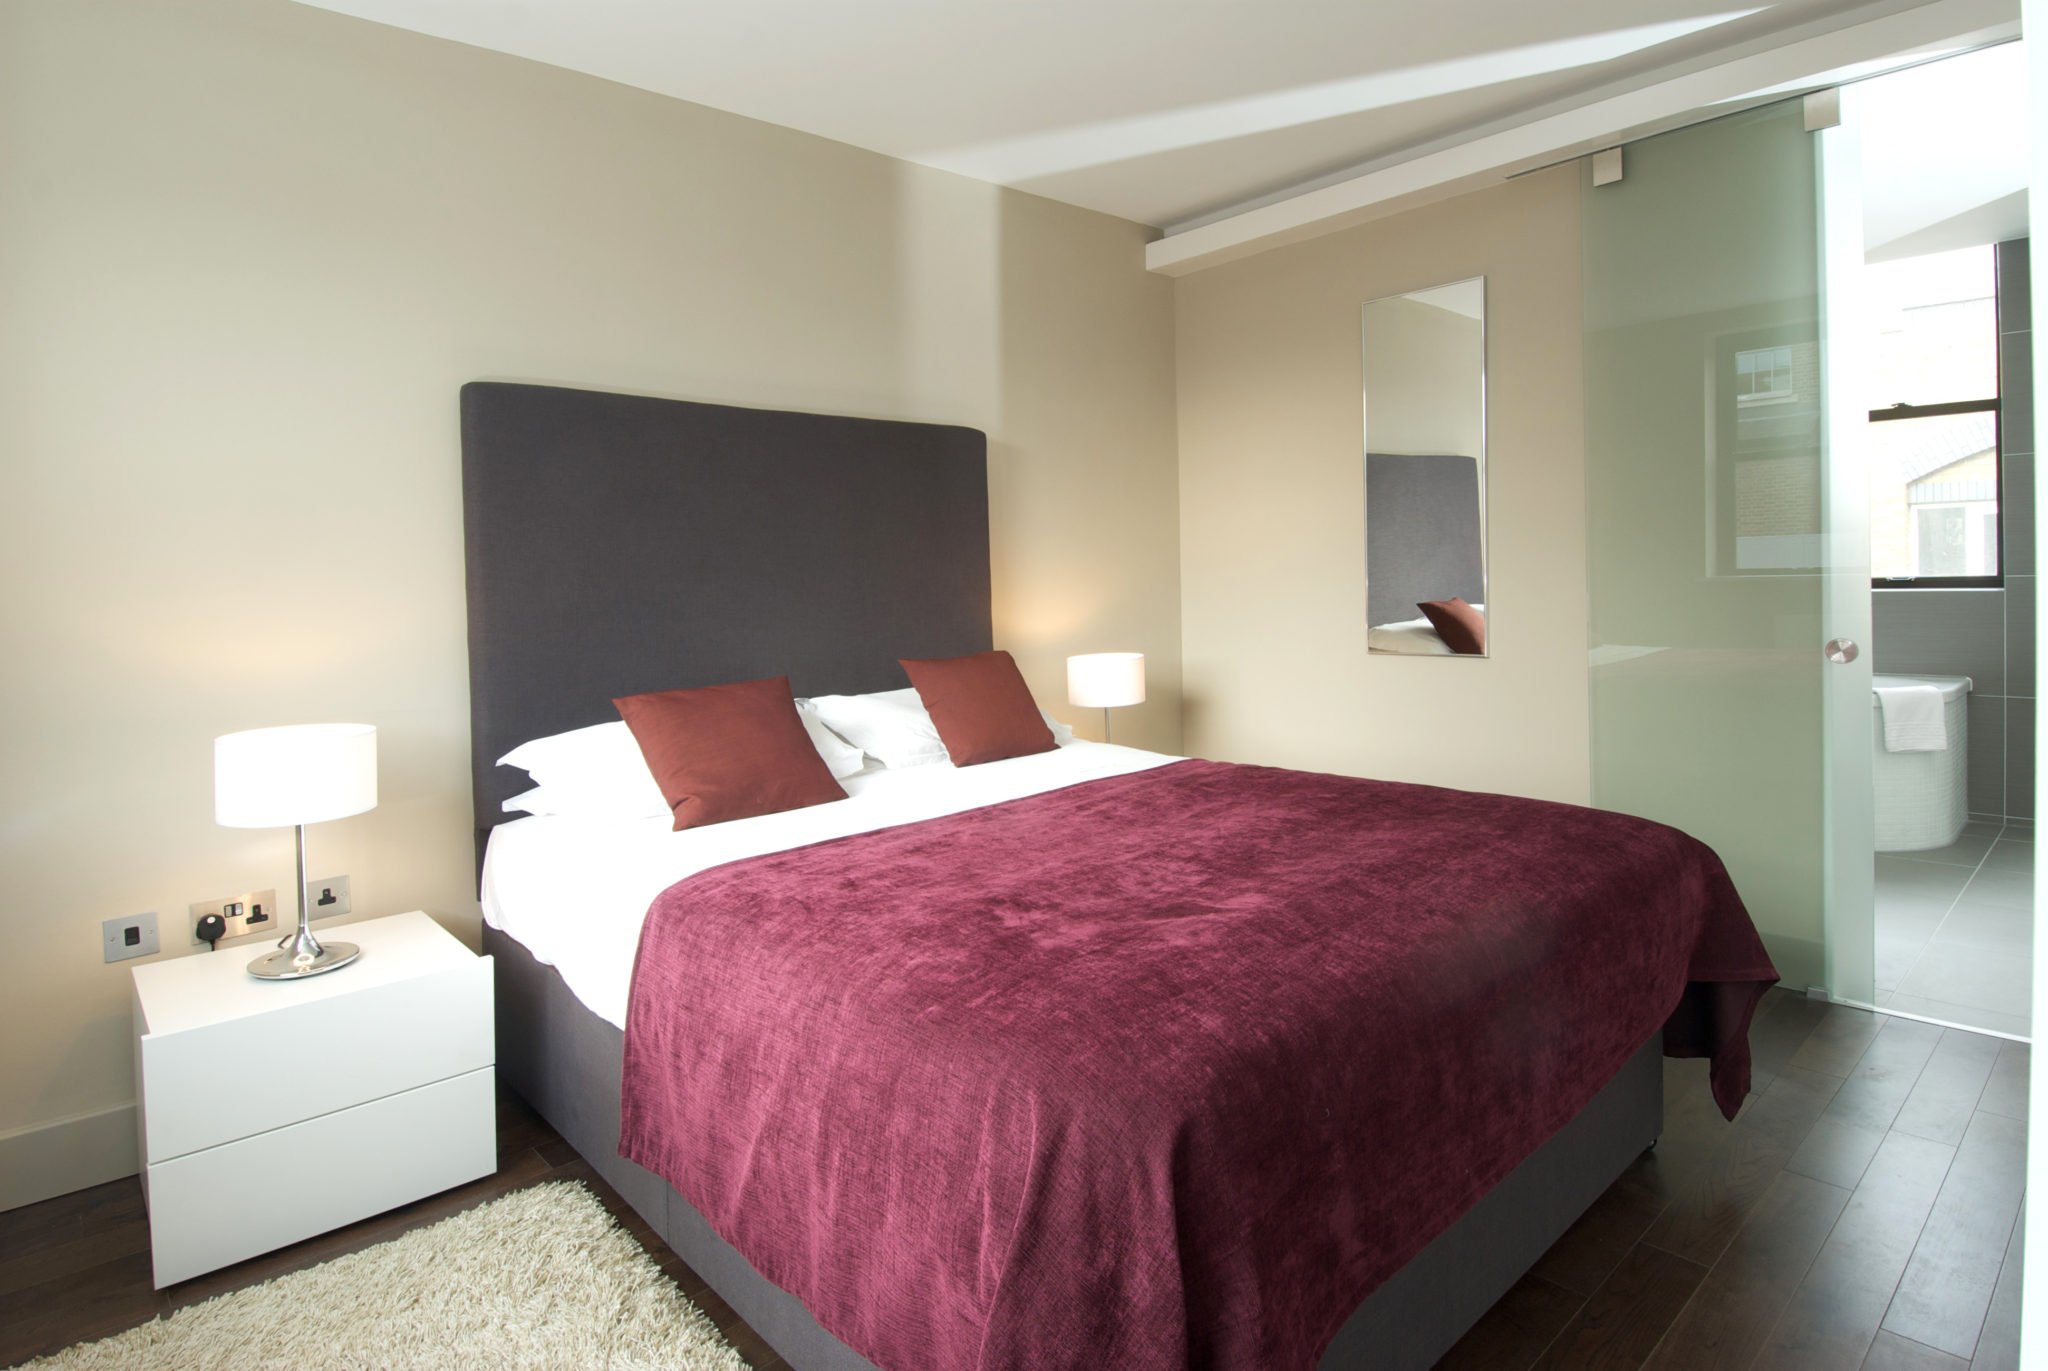 Serviced-Accommodation-Blackfriars|-5-star-short-Let-Apartments-|-Air-Con|-24h-reception-|-Free-Wi-Fi